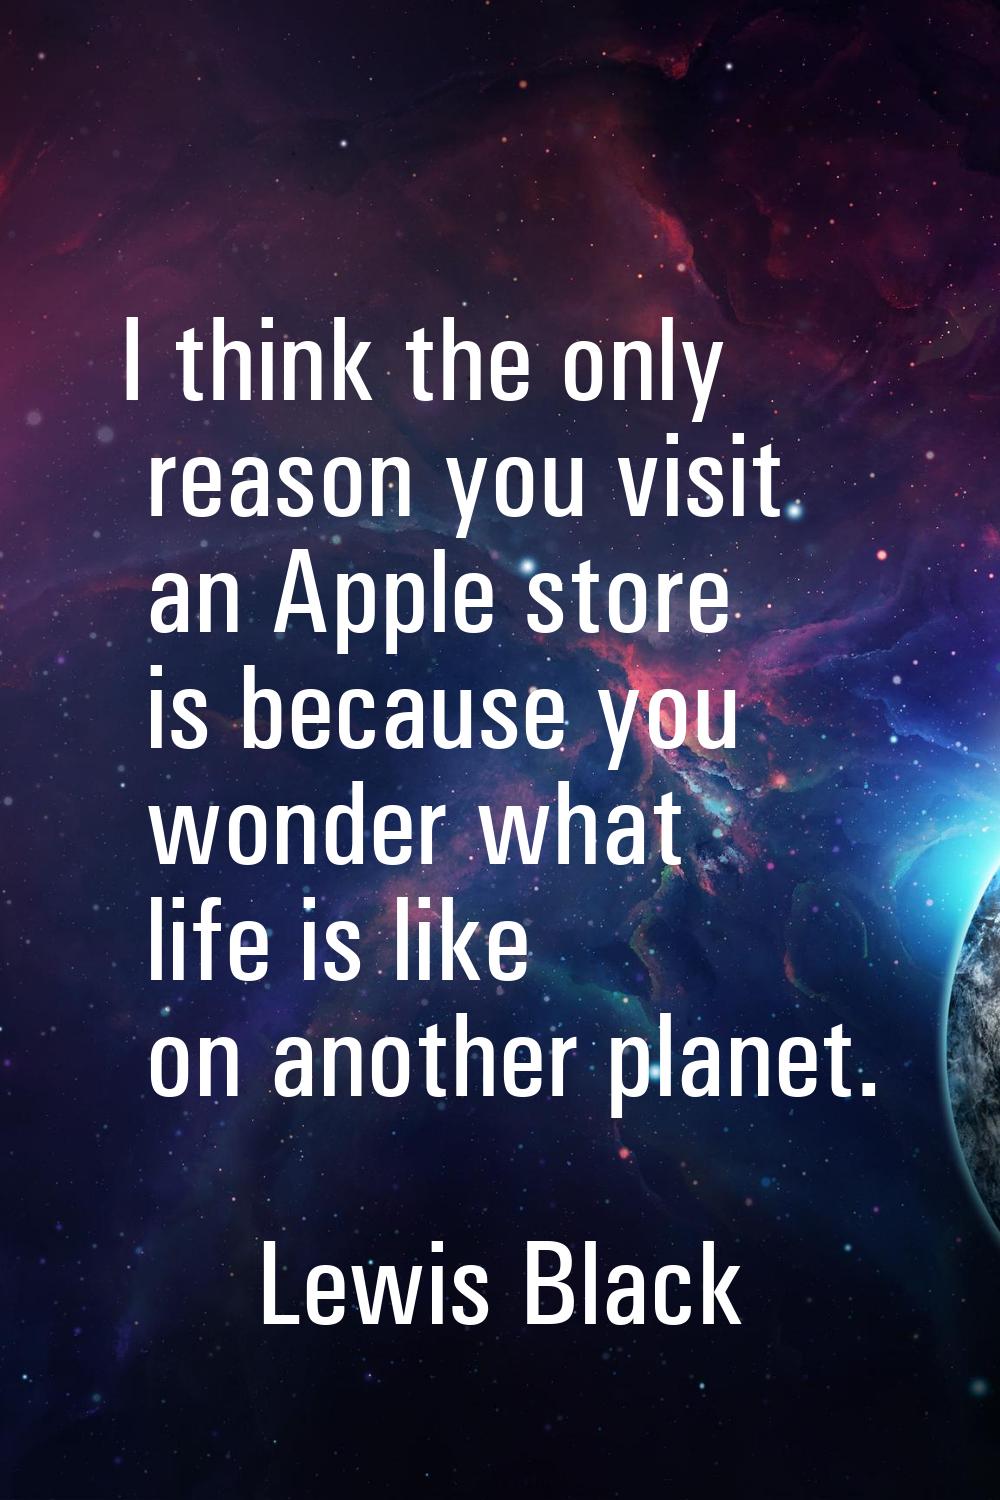 I think the only reason you visit an Apple store is because you wonder what life is like on another